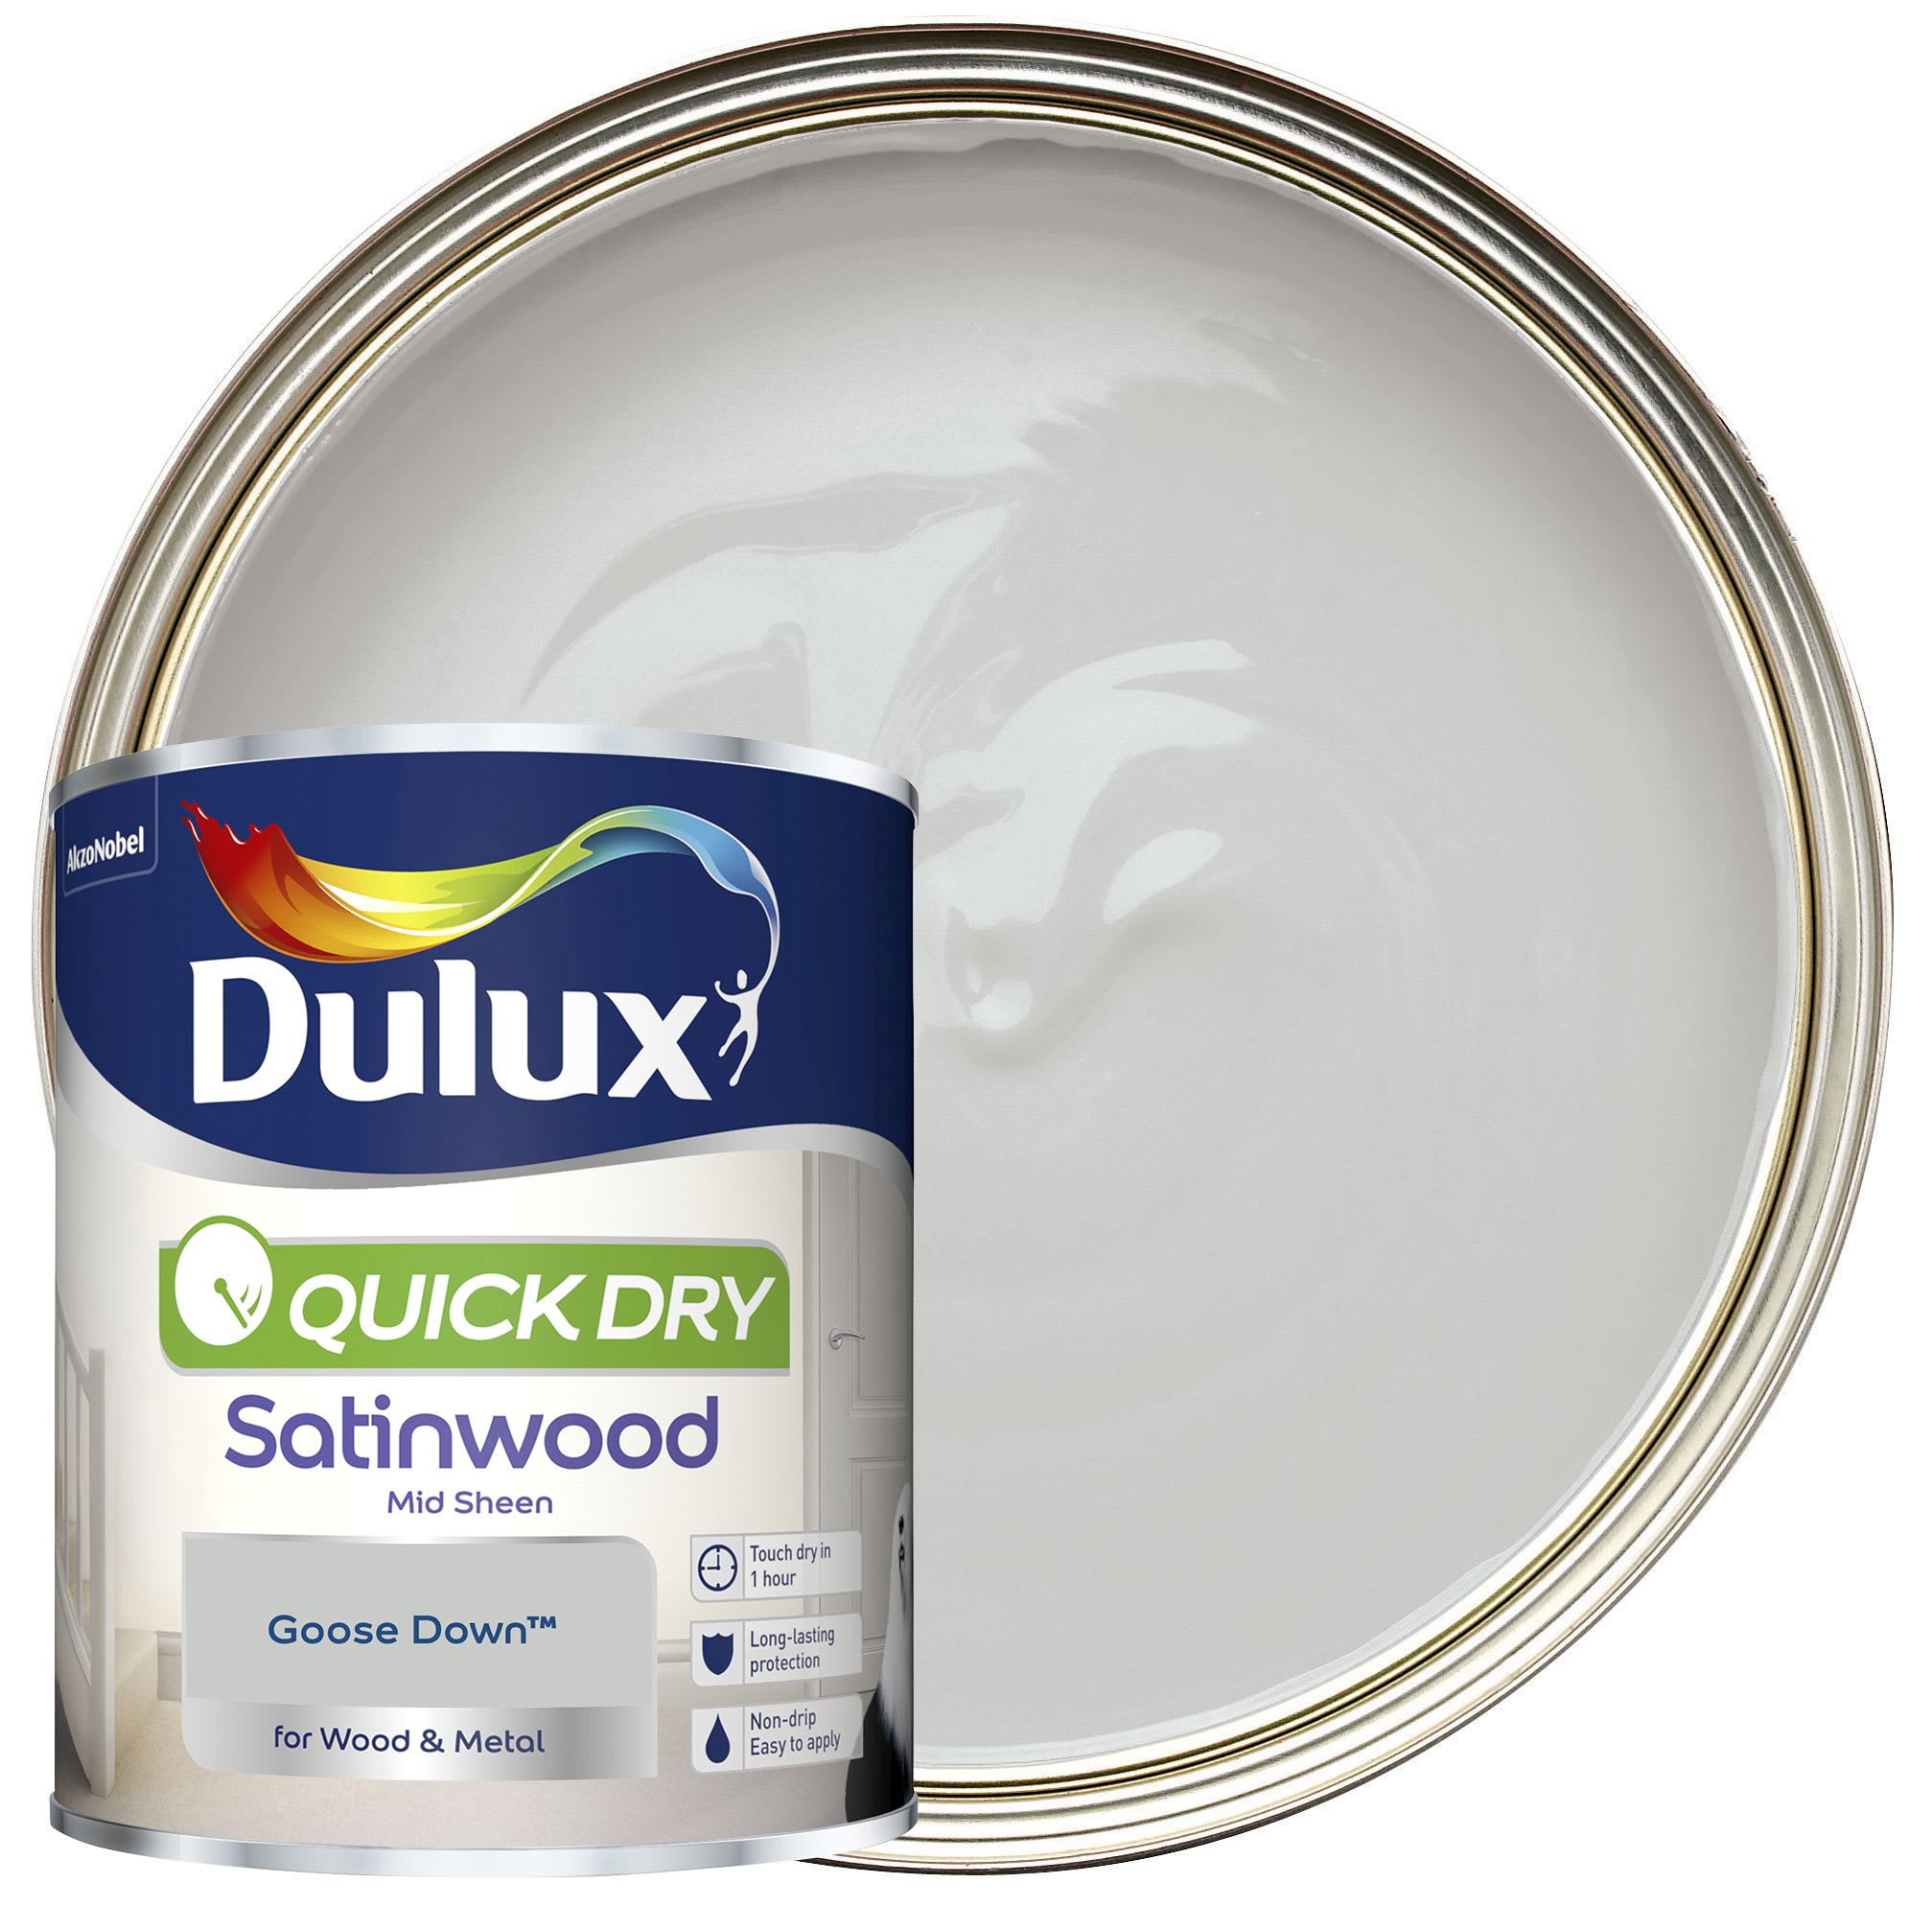 Dulux Quick Drying Satinwood Paint - Goose Down